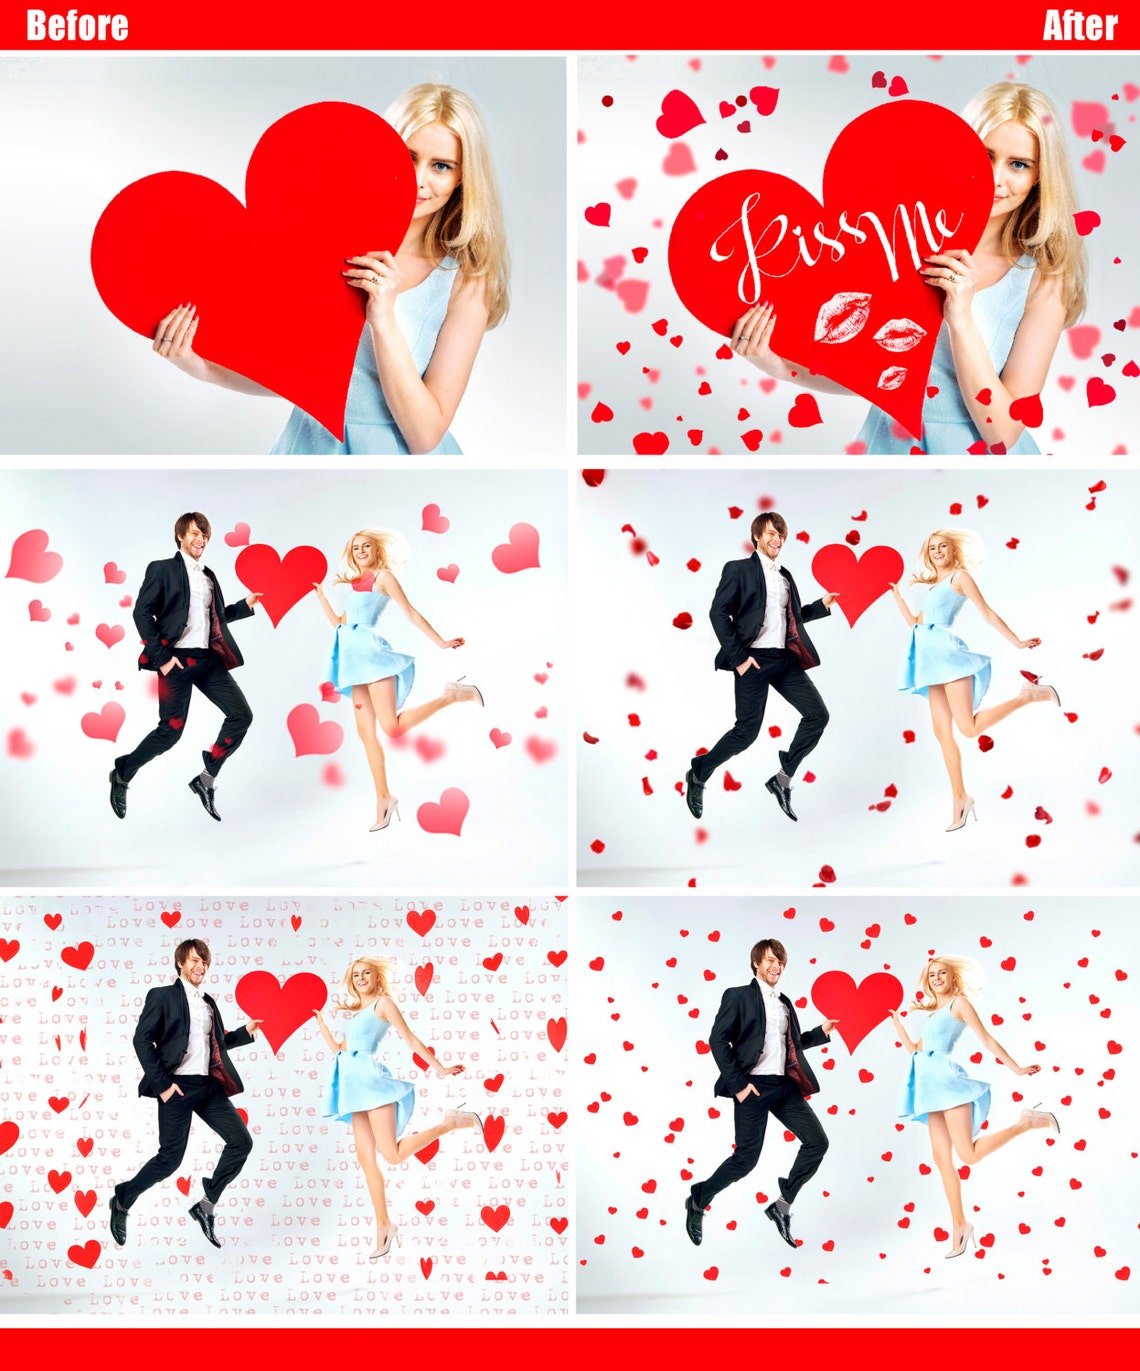 50 Valentine's photo overlays, pngpreview image.